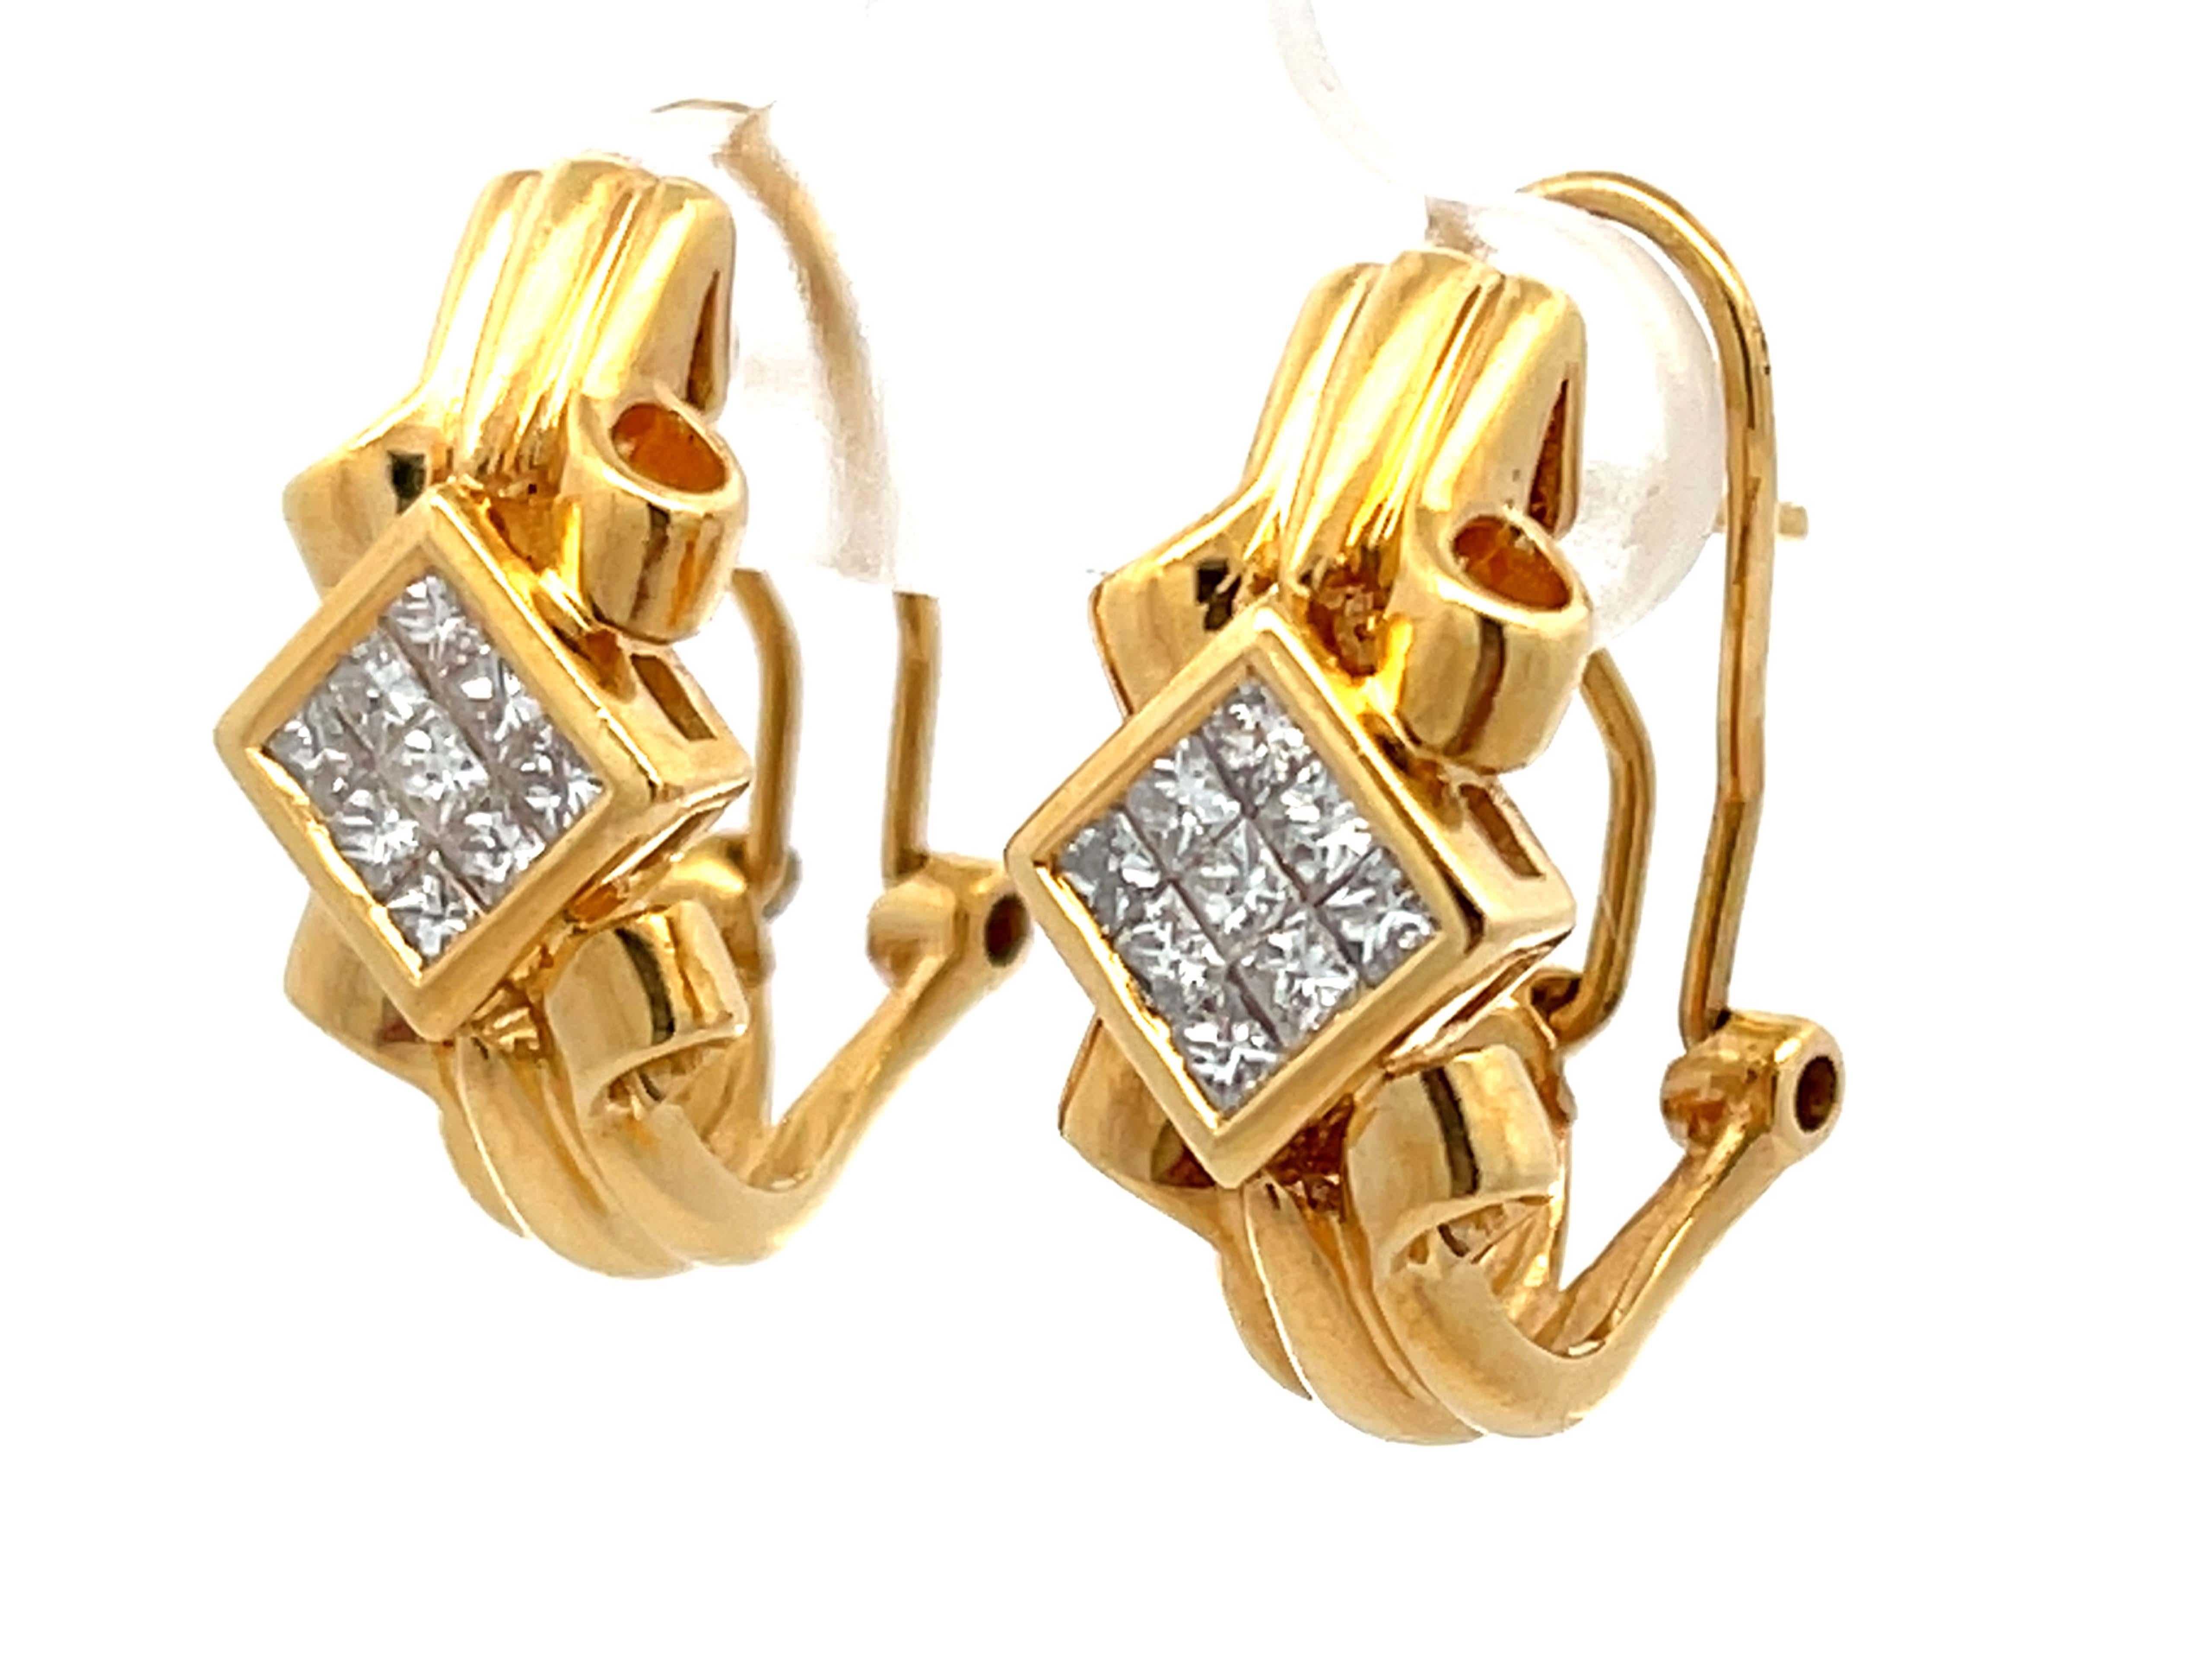 Princess Cut Diamond Huggie Earrings in 18k Yellow Gold In Excellent Condition For Sale In Honolulu, HI